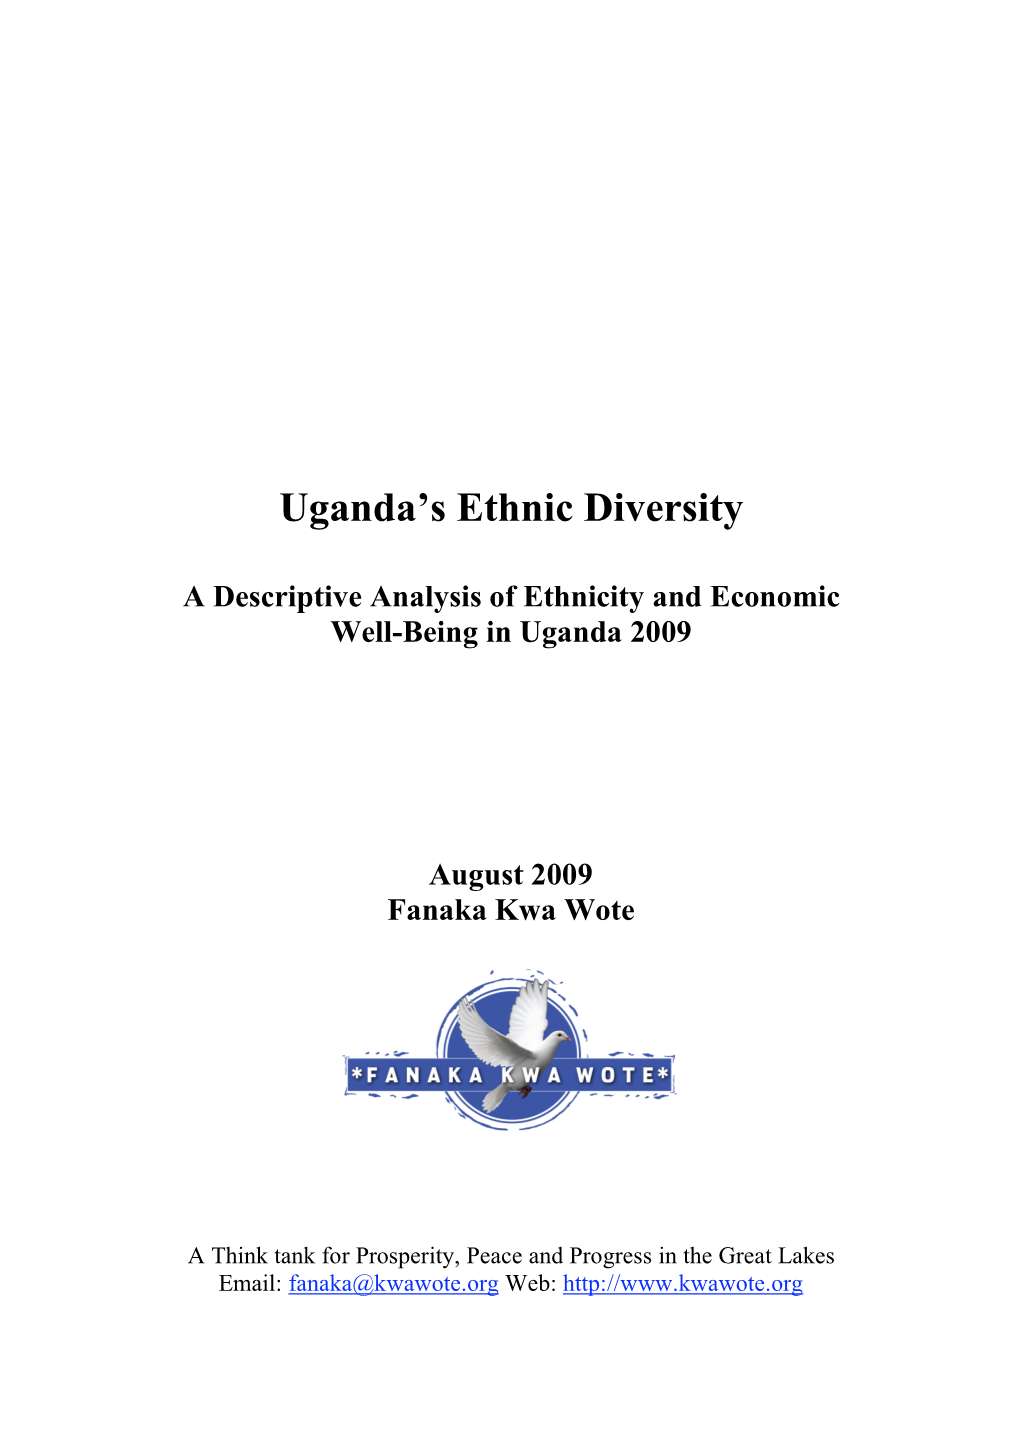 Ethnicity and Economic Well-Being in Uganda 2009